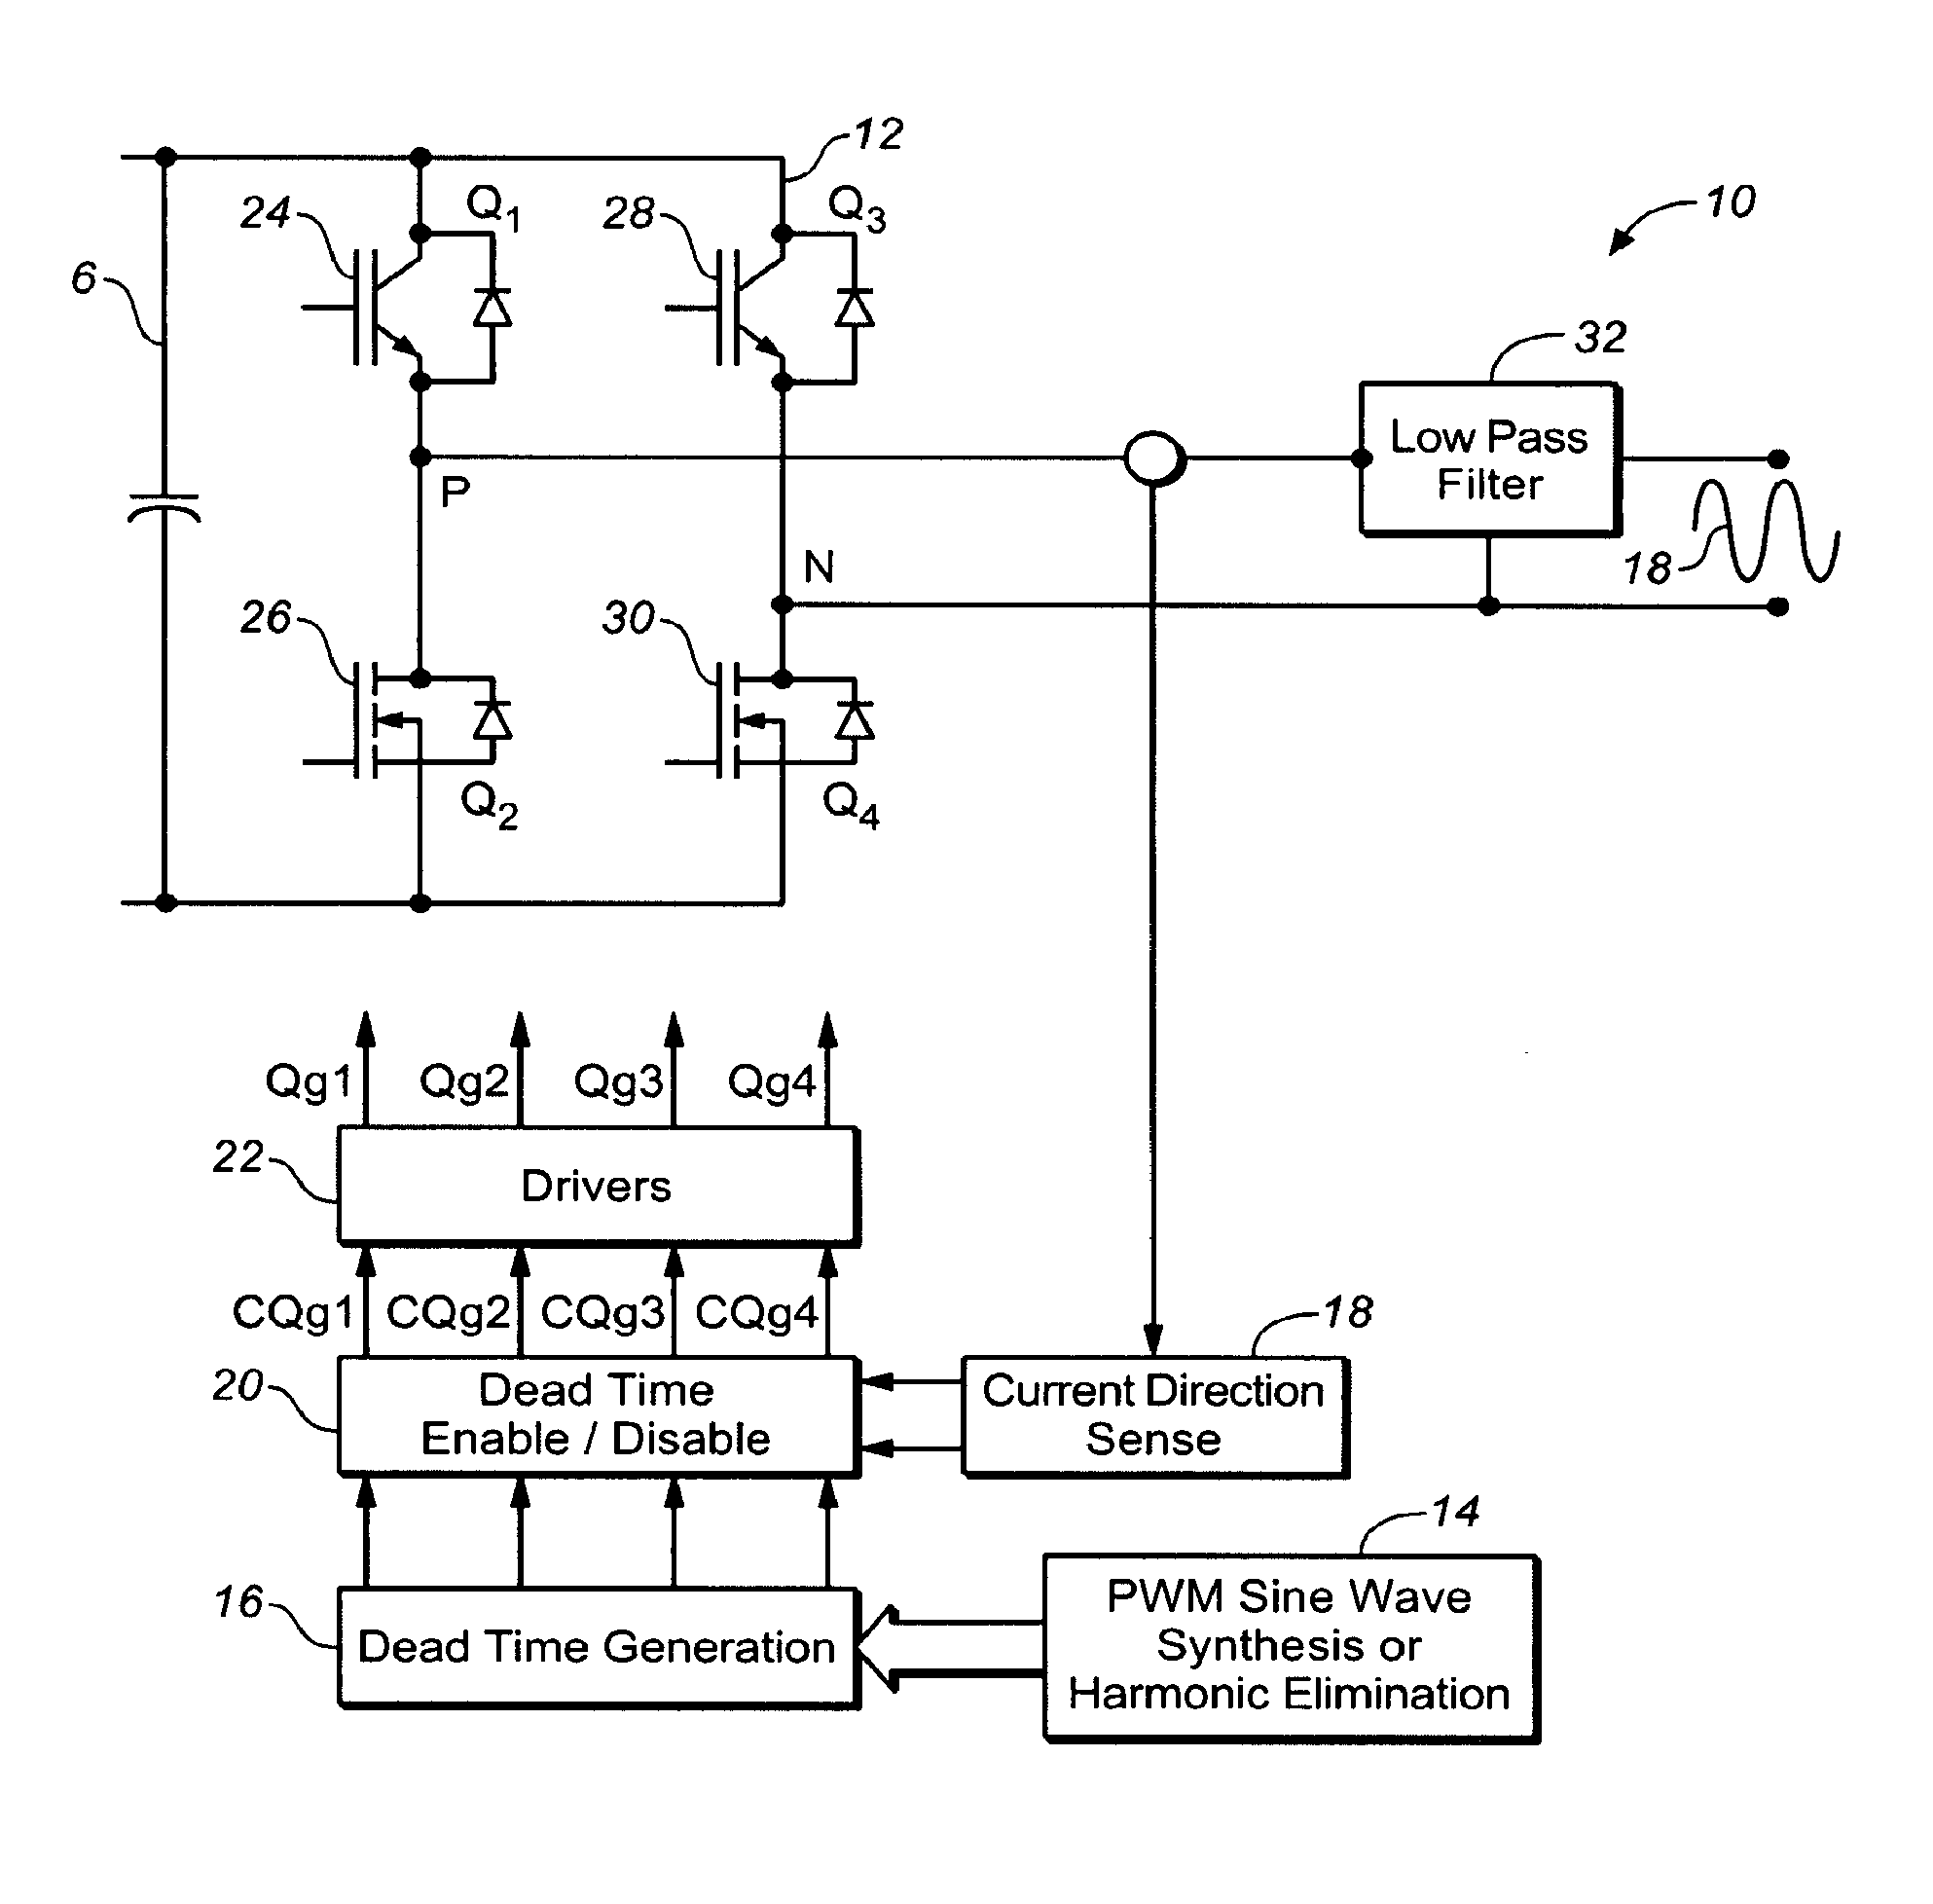 Power converter with current vector controlled dead time